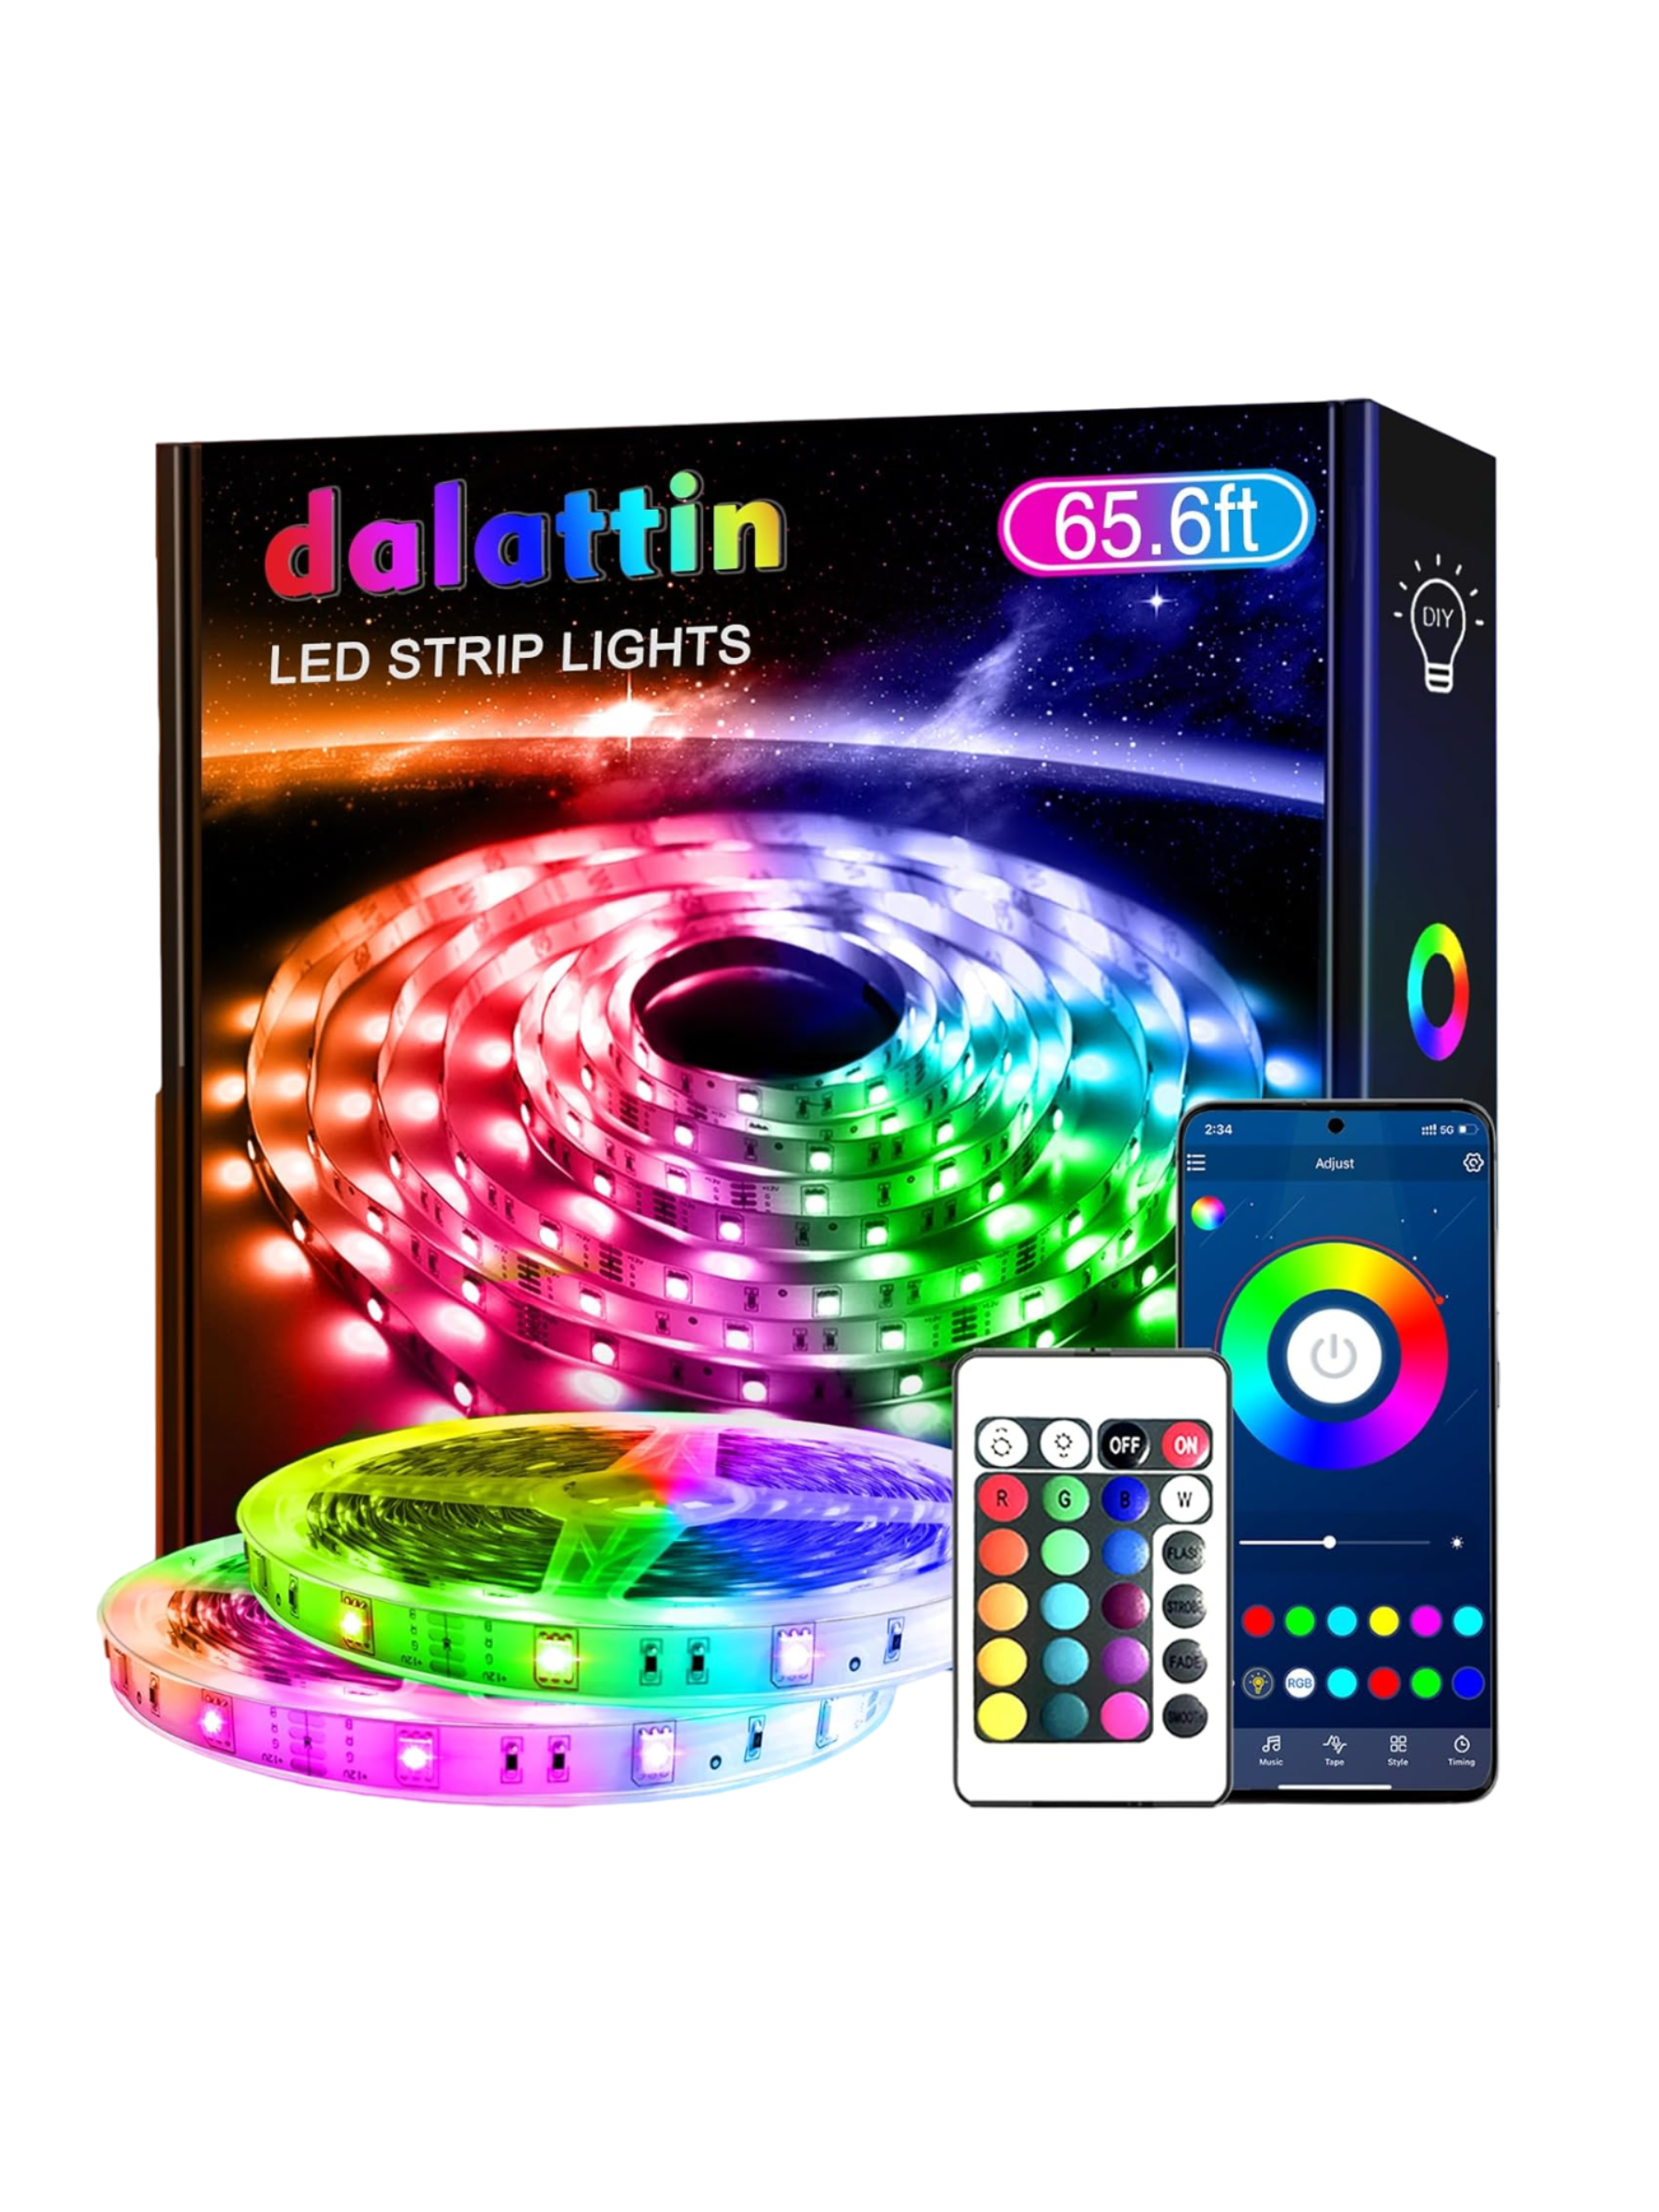 Gamers and aesthetic girls alike will appreciate these highly-rated LED lights that come with two rolls to cover a larger area and illuminate brighter thanks to more little lights than other versions. $12, Amazon. <a href="https://www.amazon.com/dp/B08CKBRC4Q?">Get it now!</a><p>Sign up for today’s biggest stories, from pop culture to politics.</p><a href="https://www.glamour.com/newsletter/news?sourceCode=msnsend">Sign Up</a>